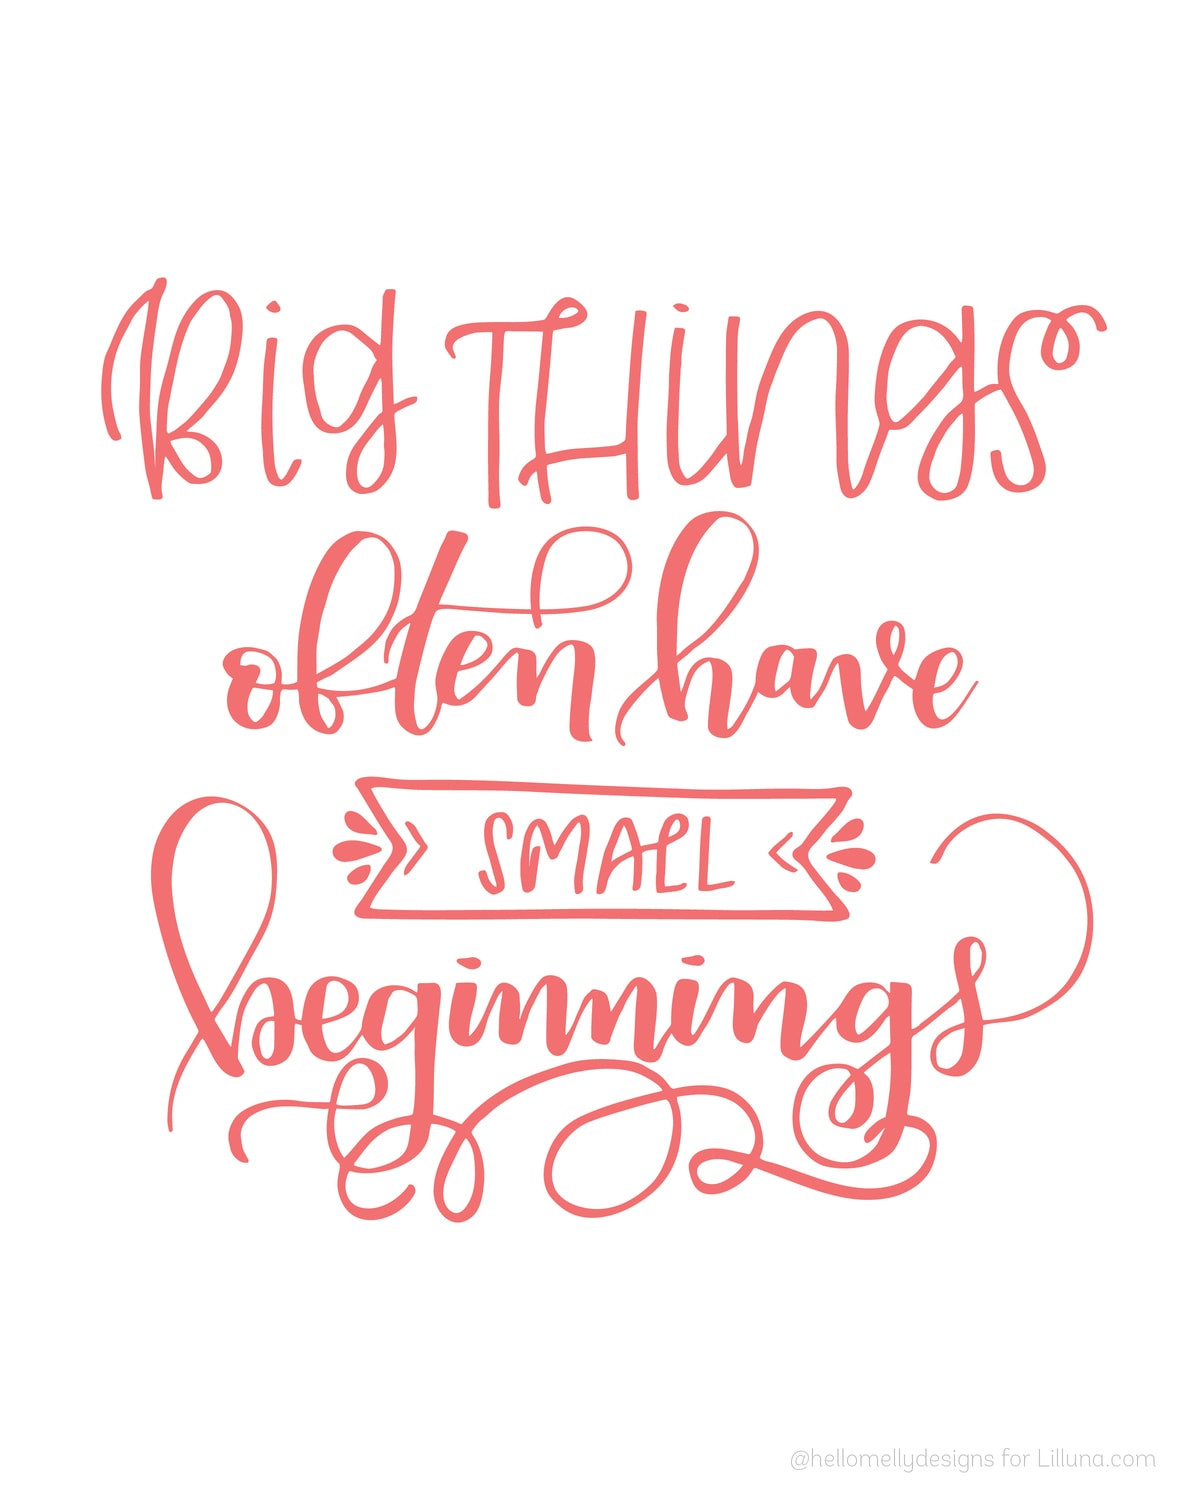 Small Inspirational Quotes
 Big Things ten Have Small Beginnings Lil Luna